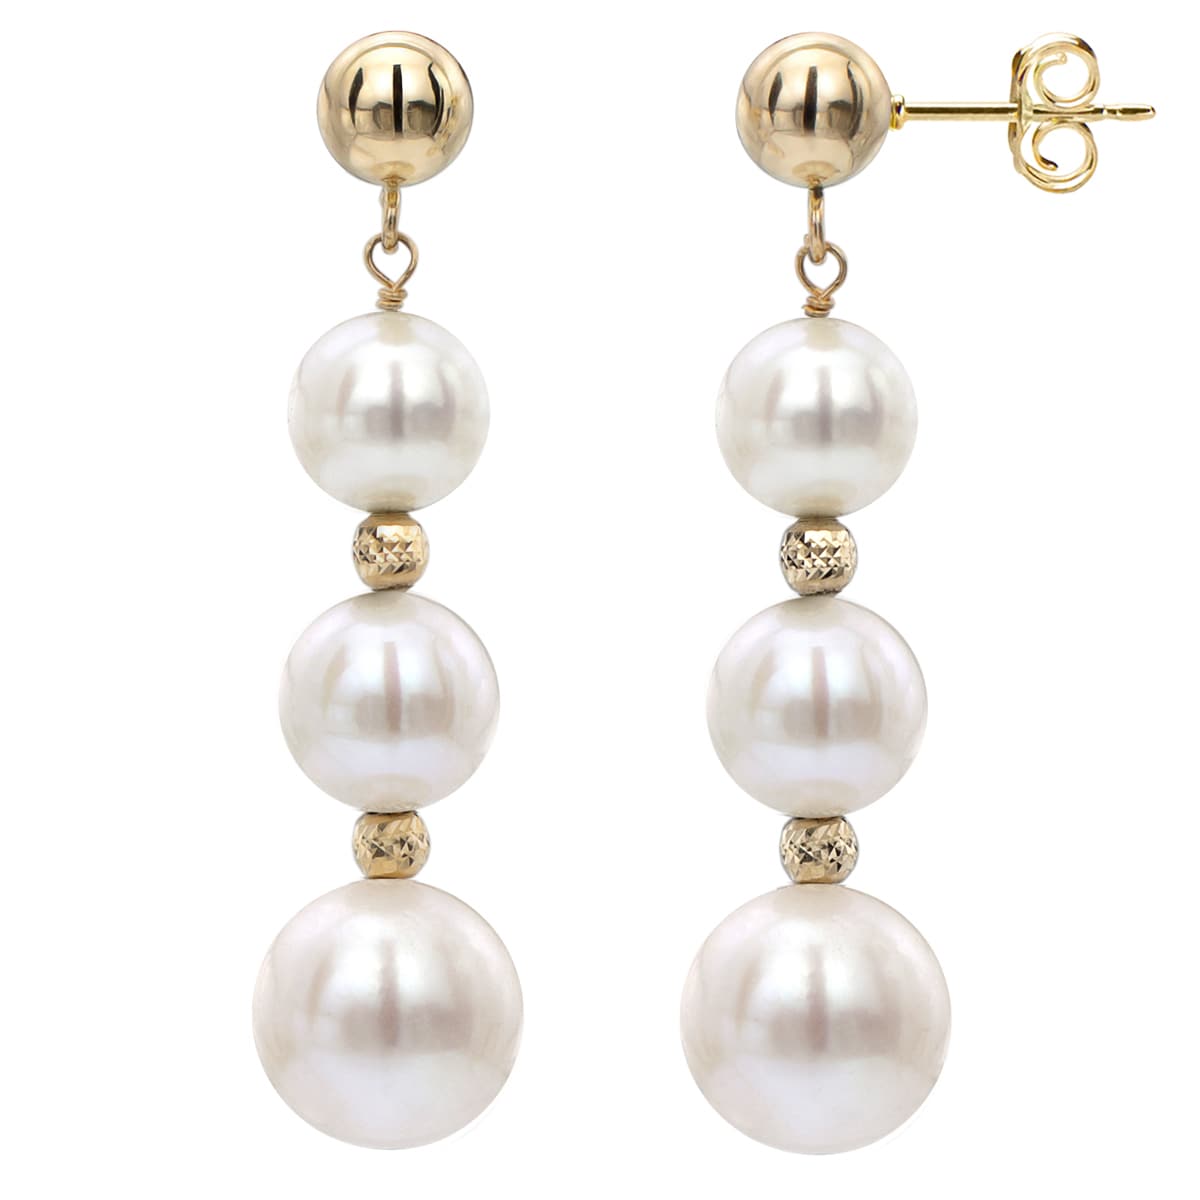 DaVonna White Freshwater Graduated Pearl and Beads Dangle Earring